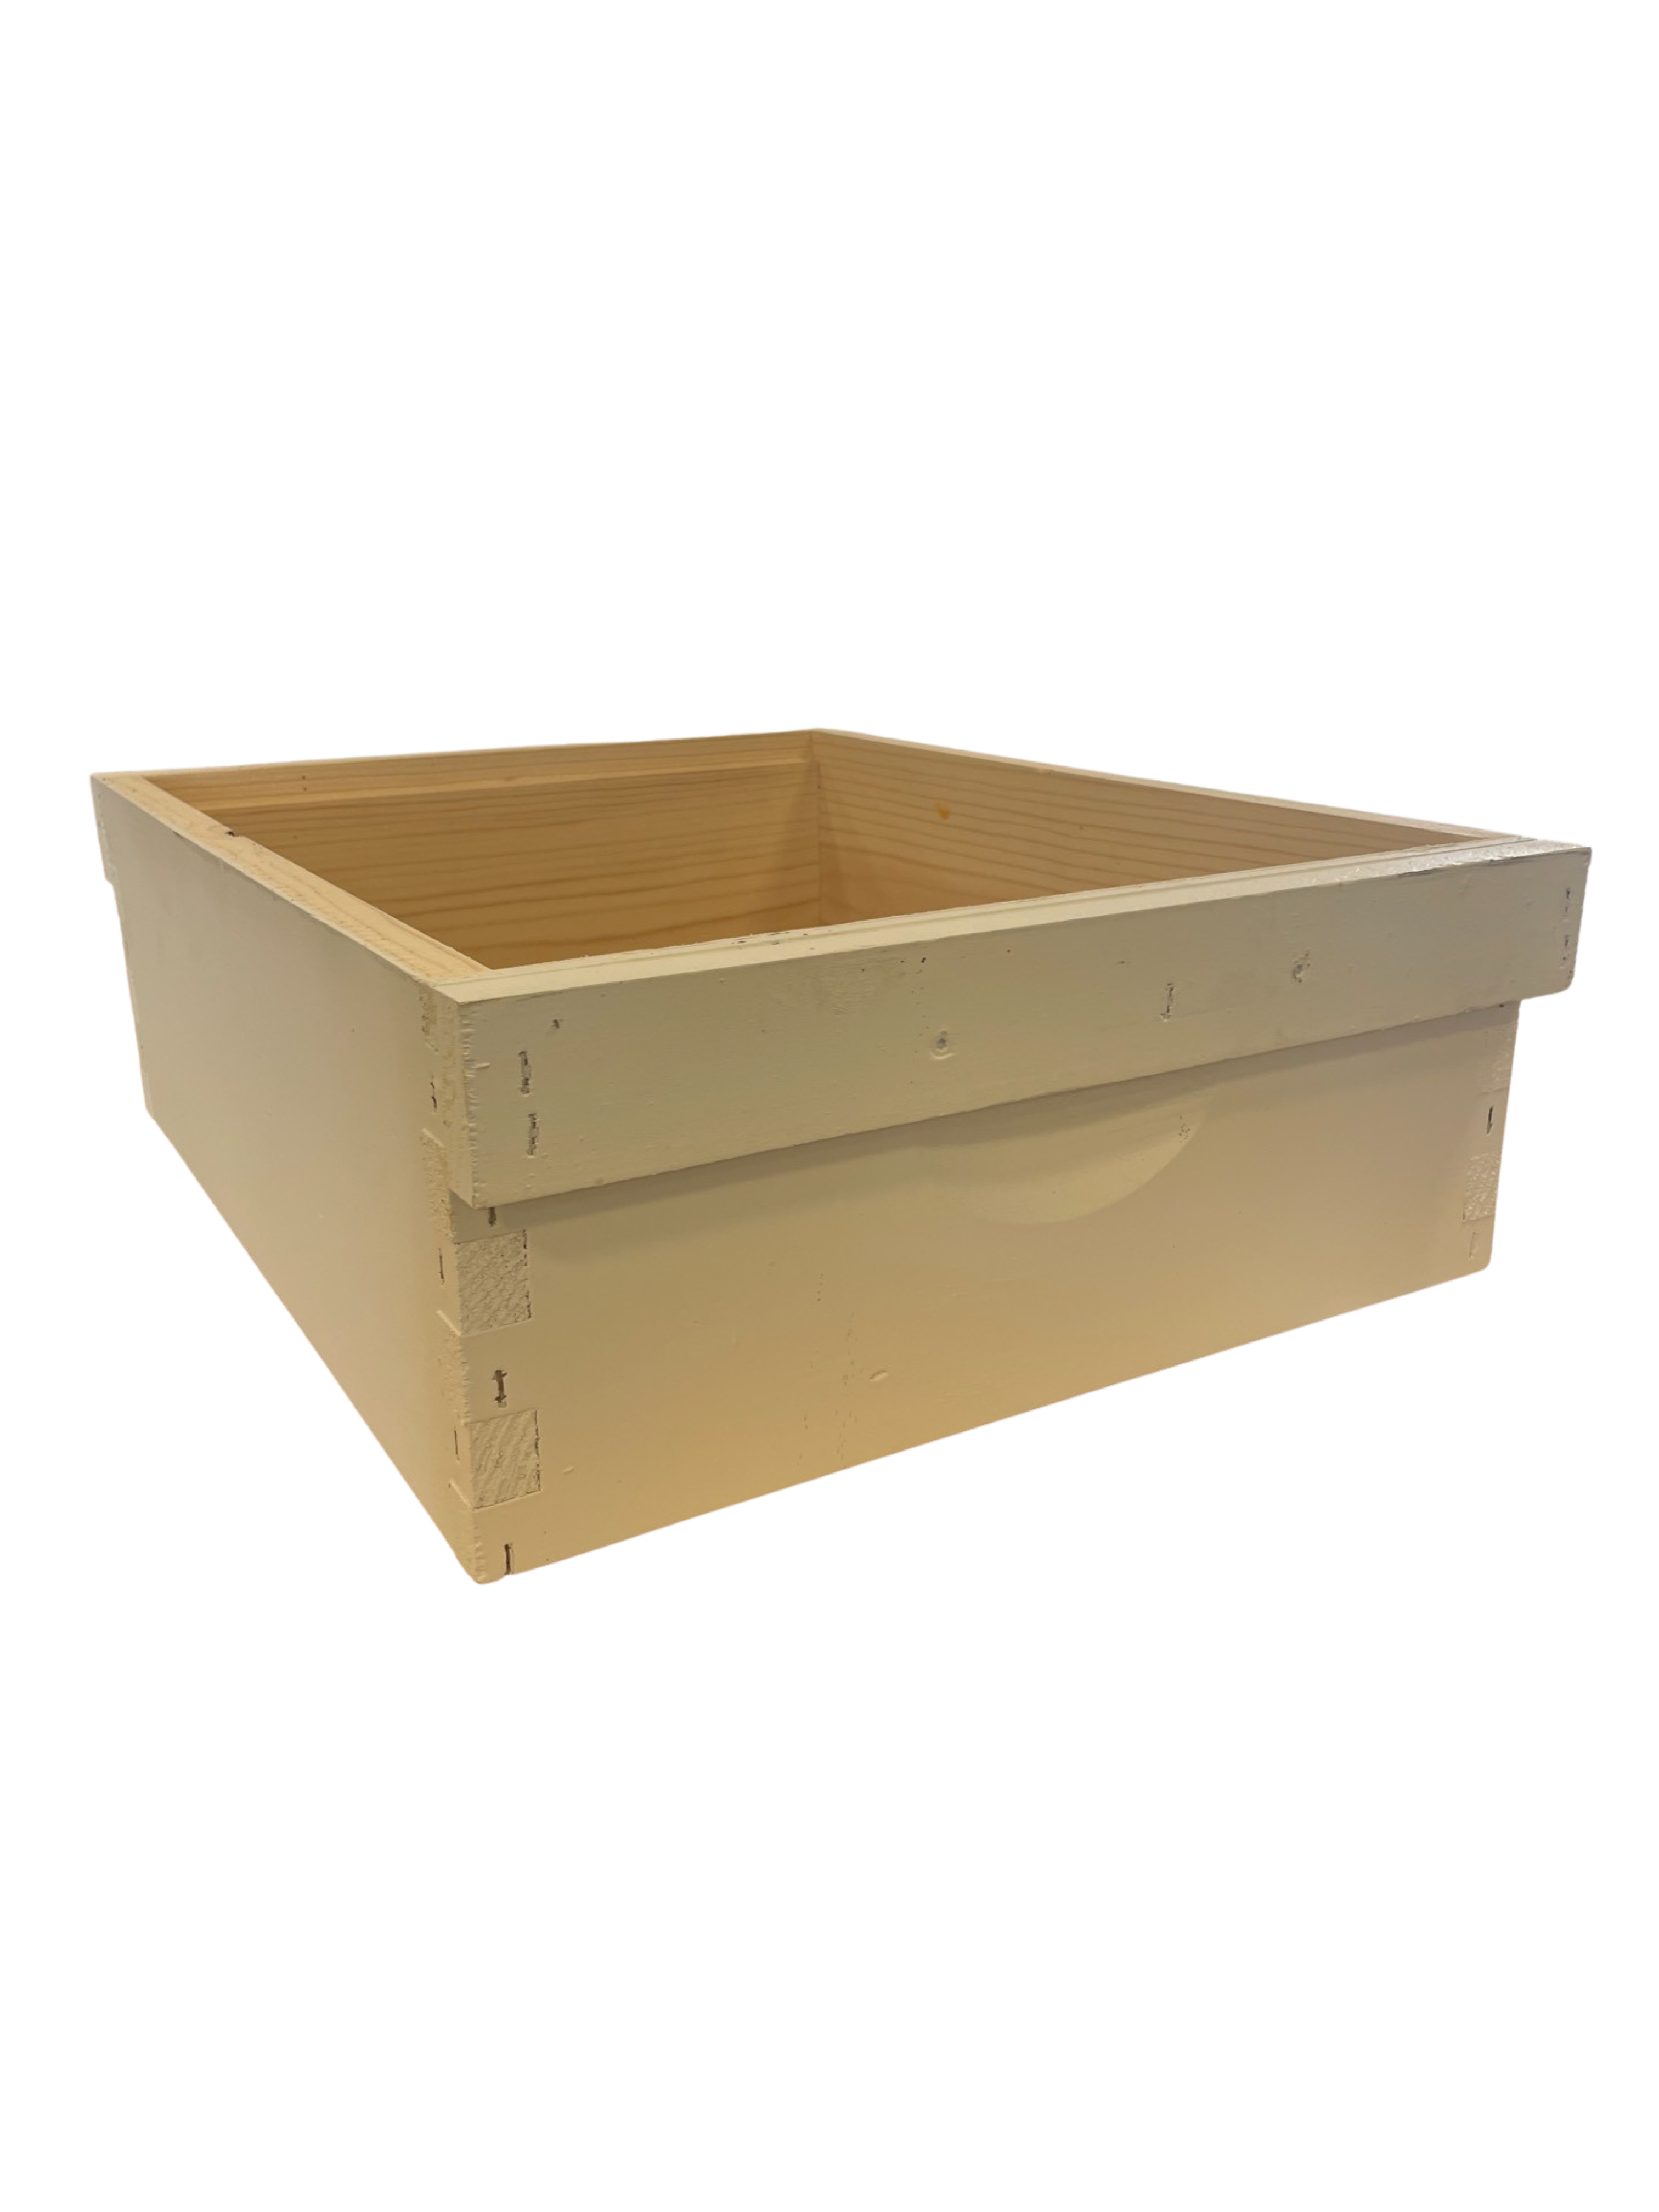 Shallow (6 5/8") Hive Box  | Cleated